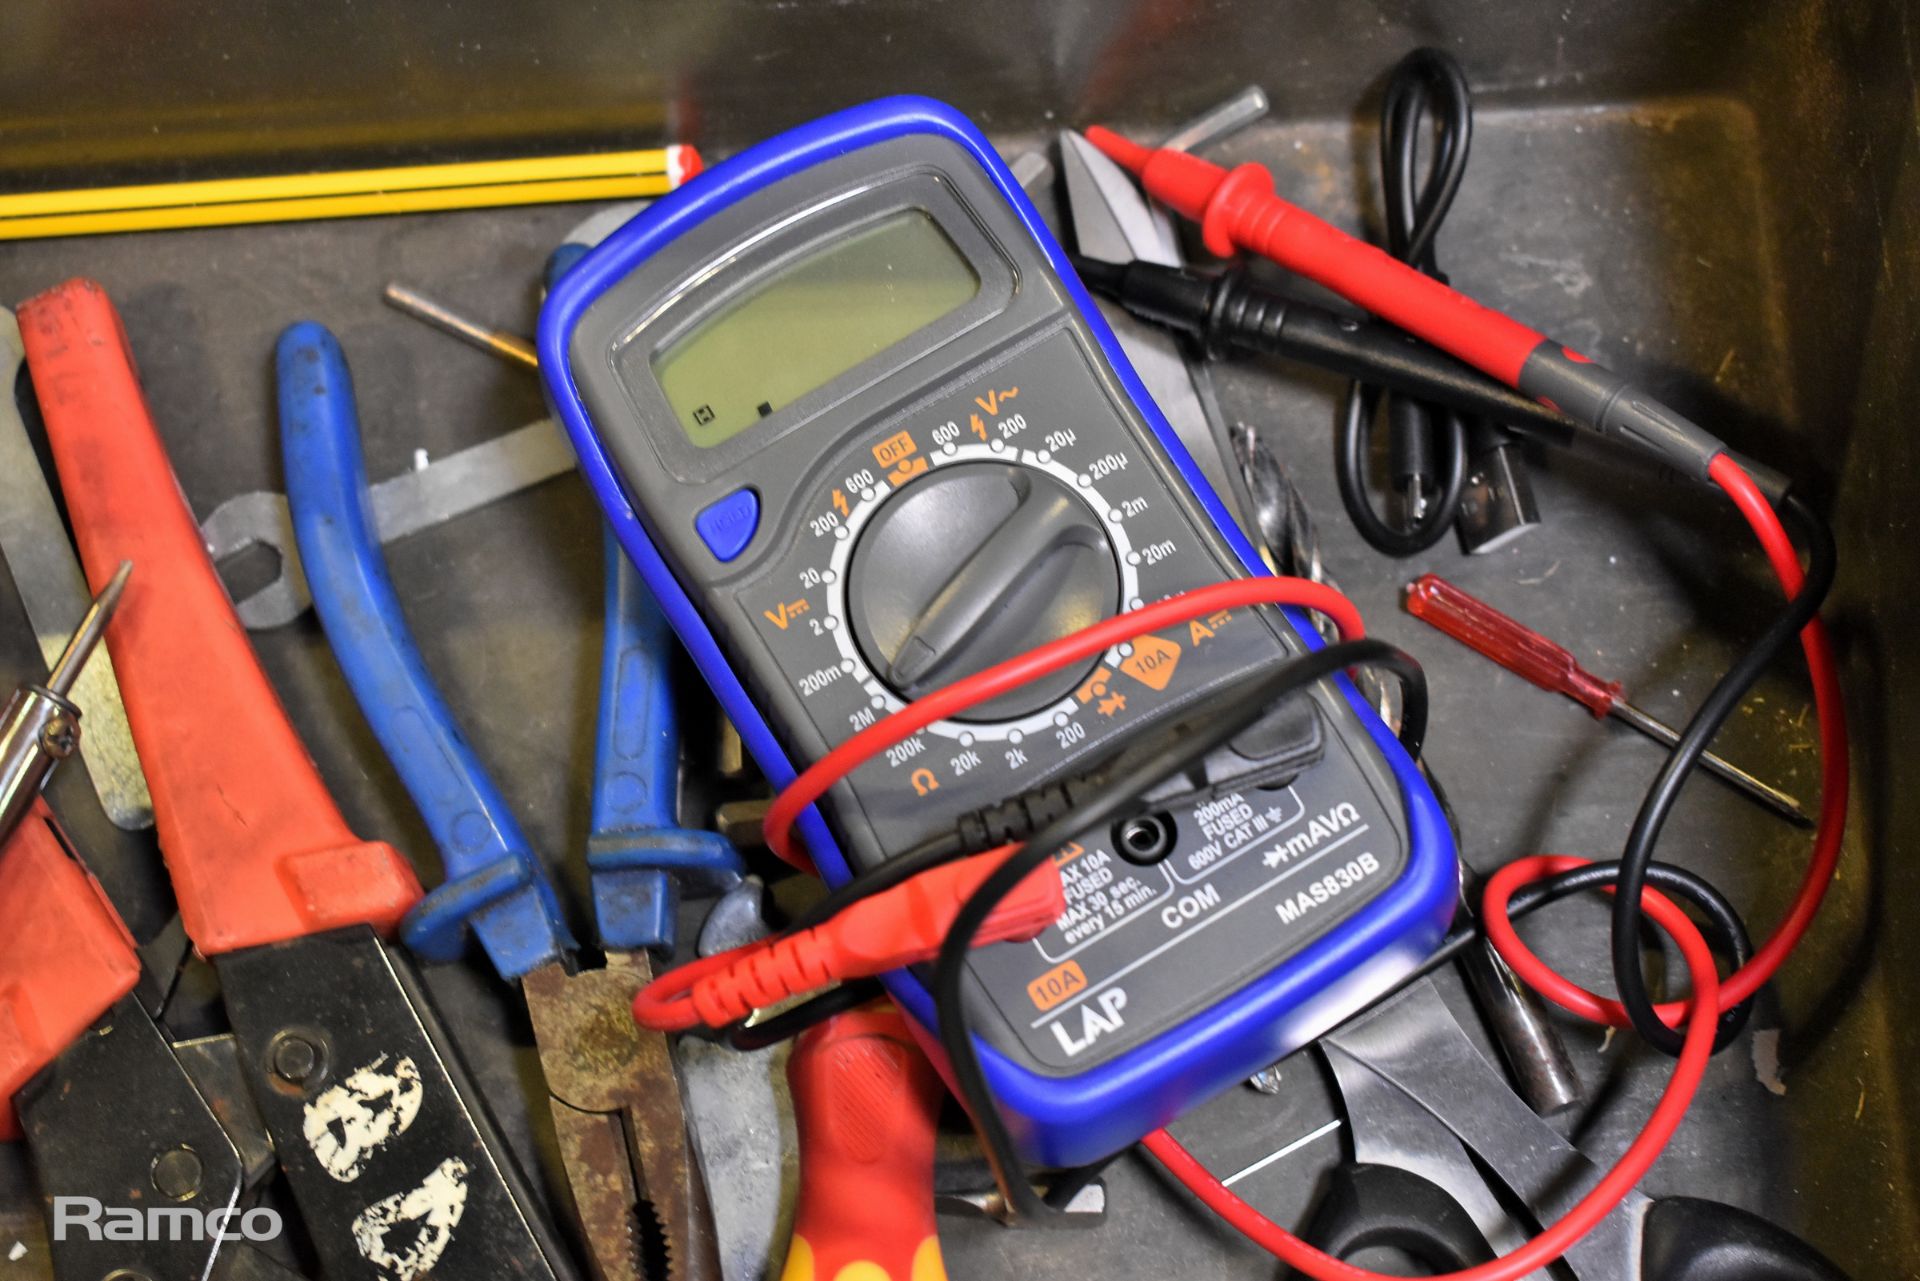 Various tools, 40W soldering iron kit, voltage meter reader, HDMI cable, sockets etc - Image 3 of 3